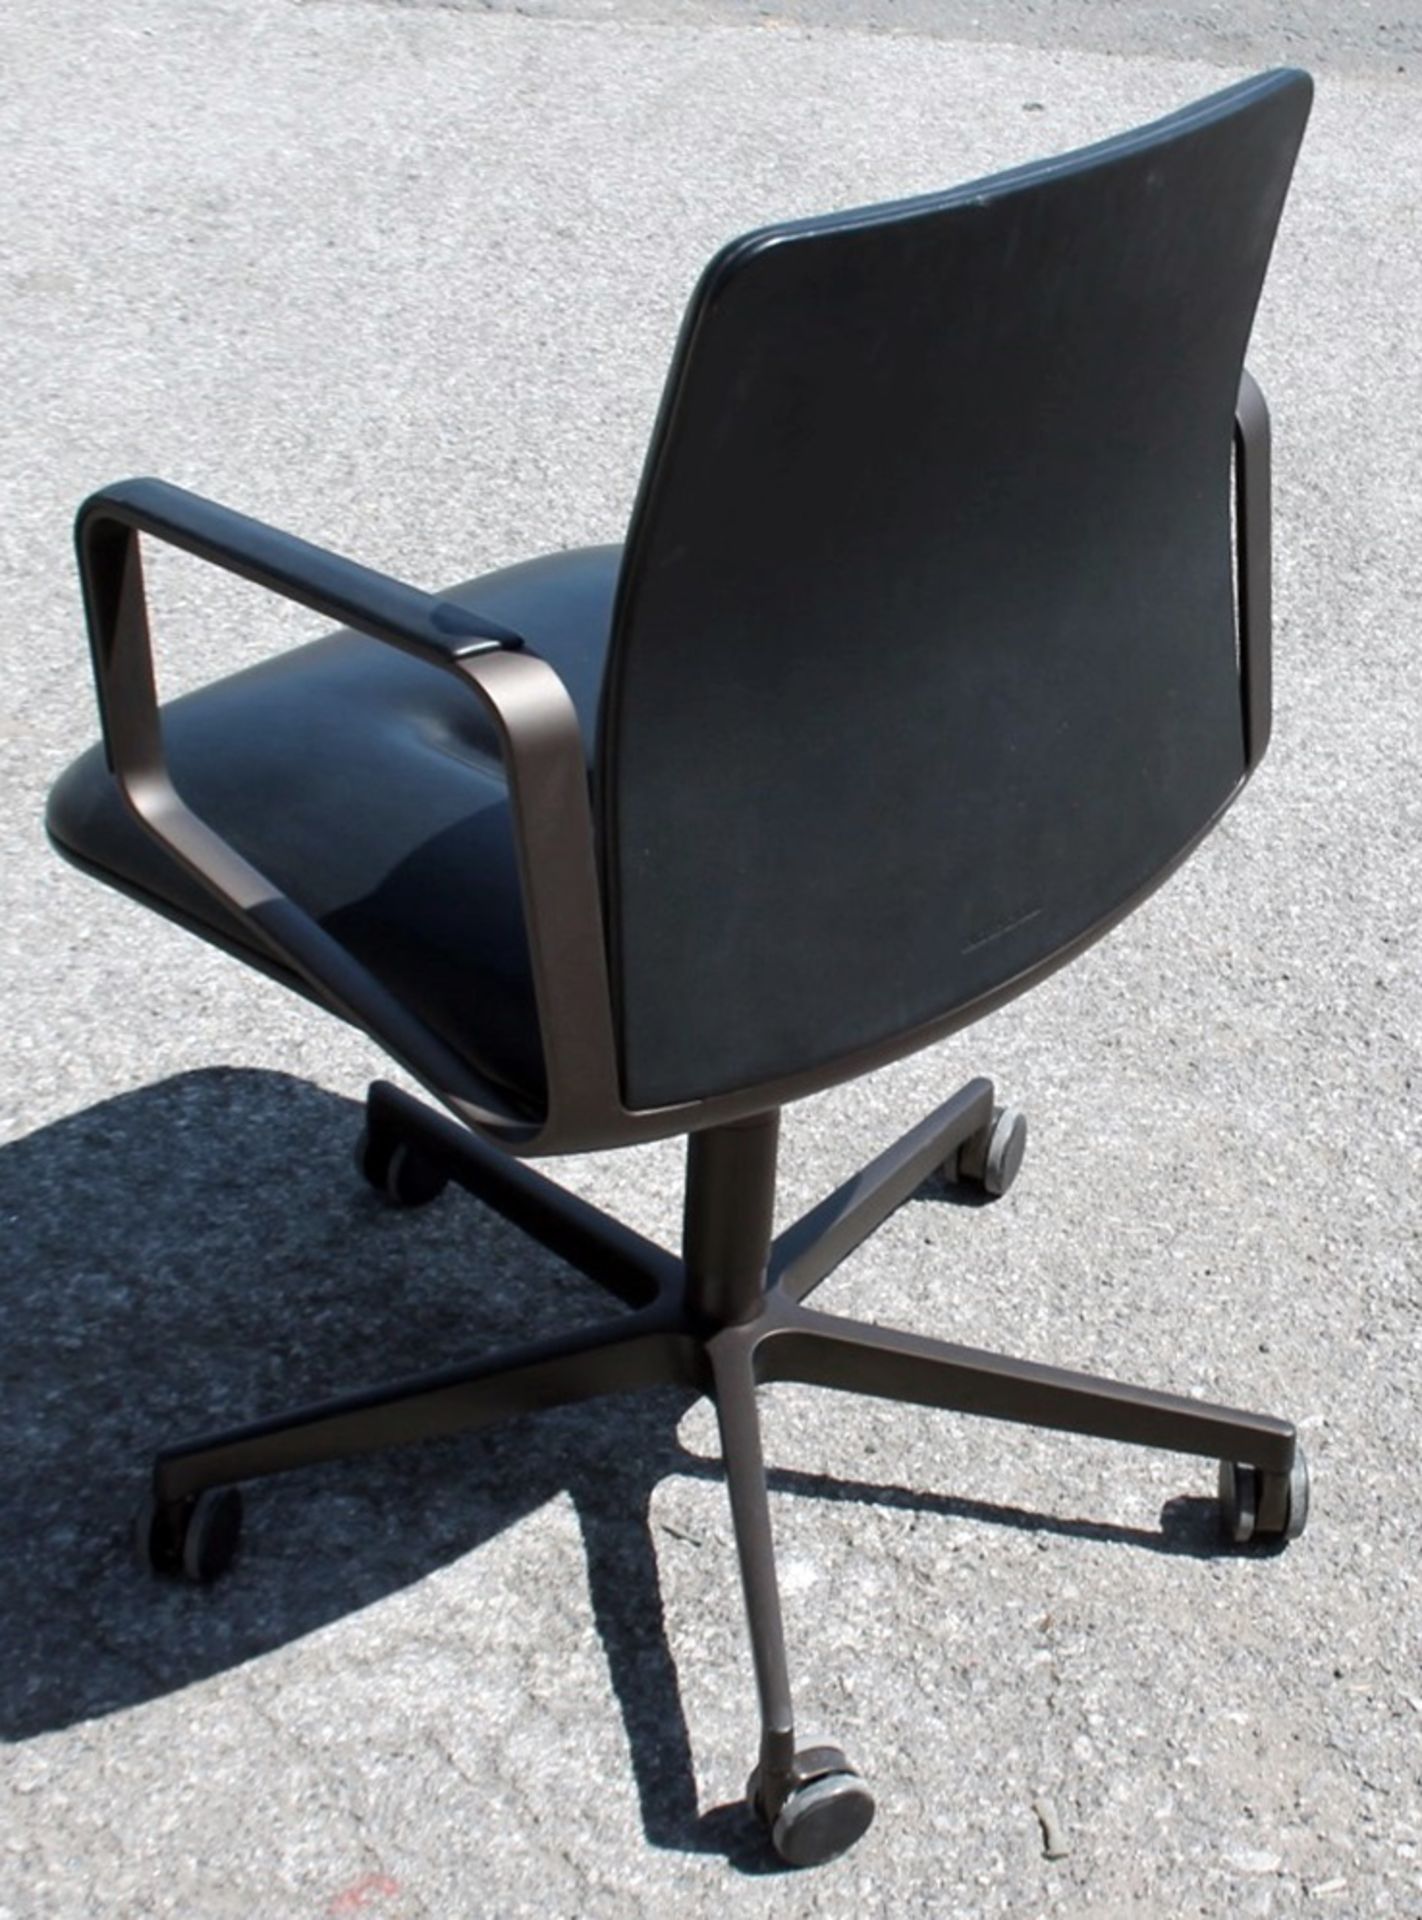 1 x WALTER KNOLL 'Leadchair' Executive Meeting Chair In Genuine Leather - Original RRP £4,250 - Image 5 of 9